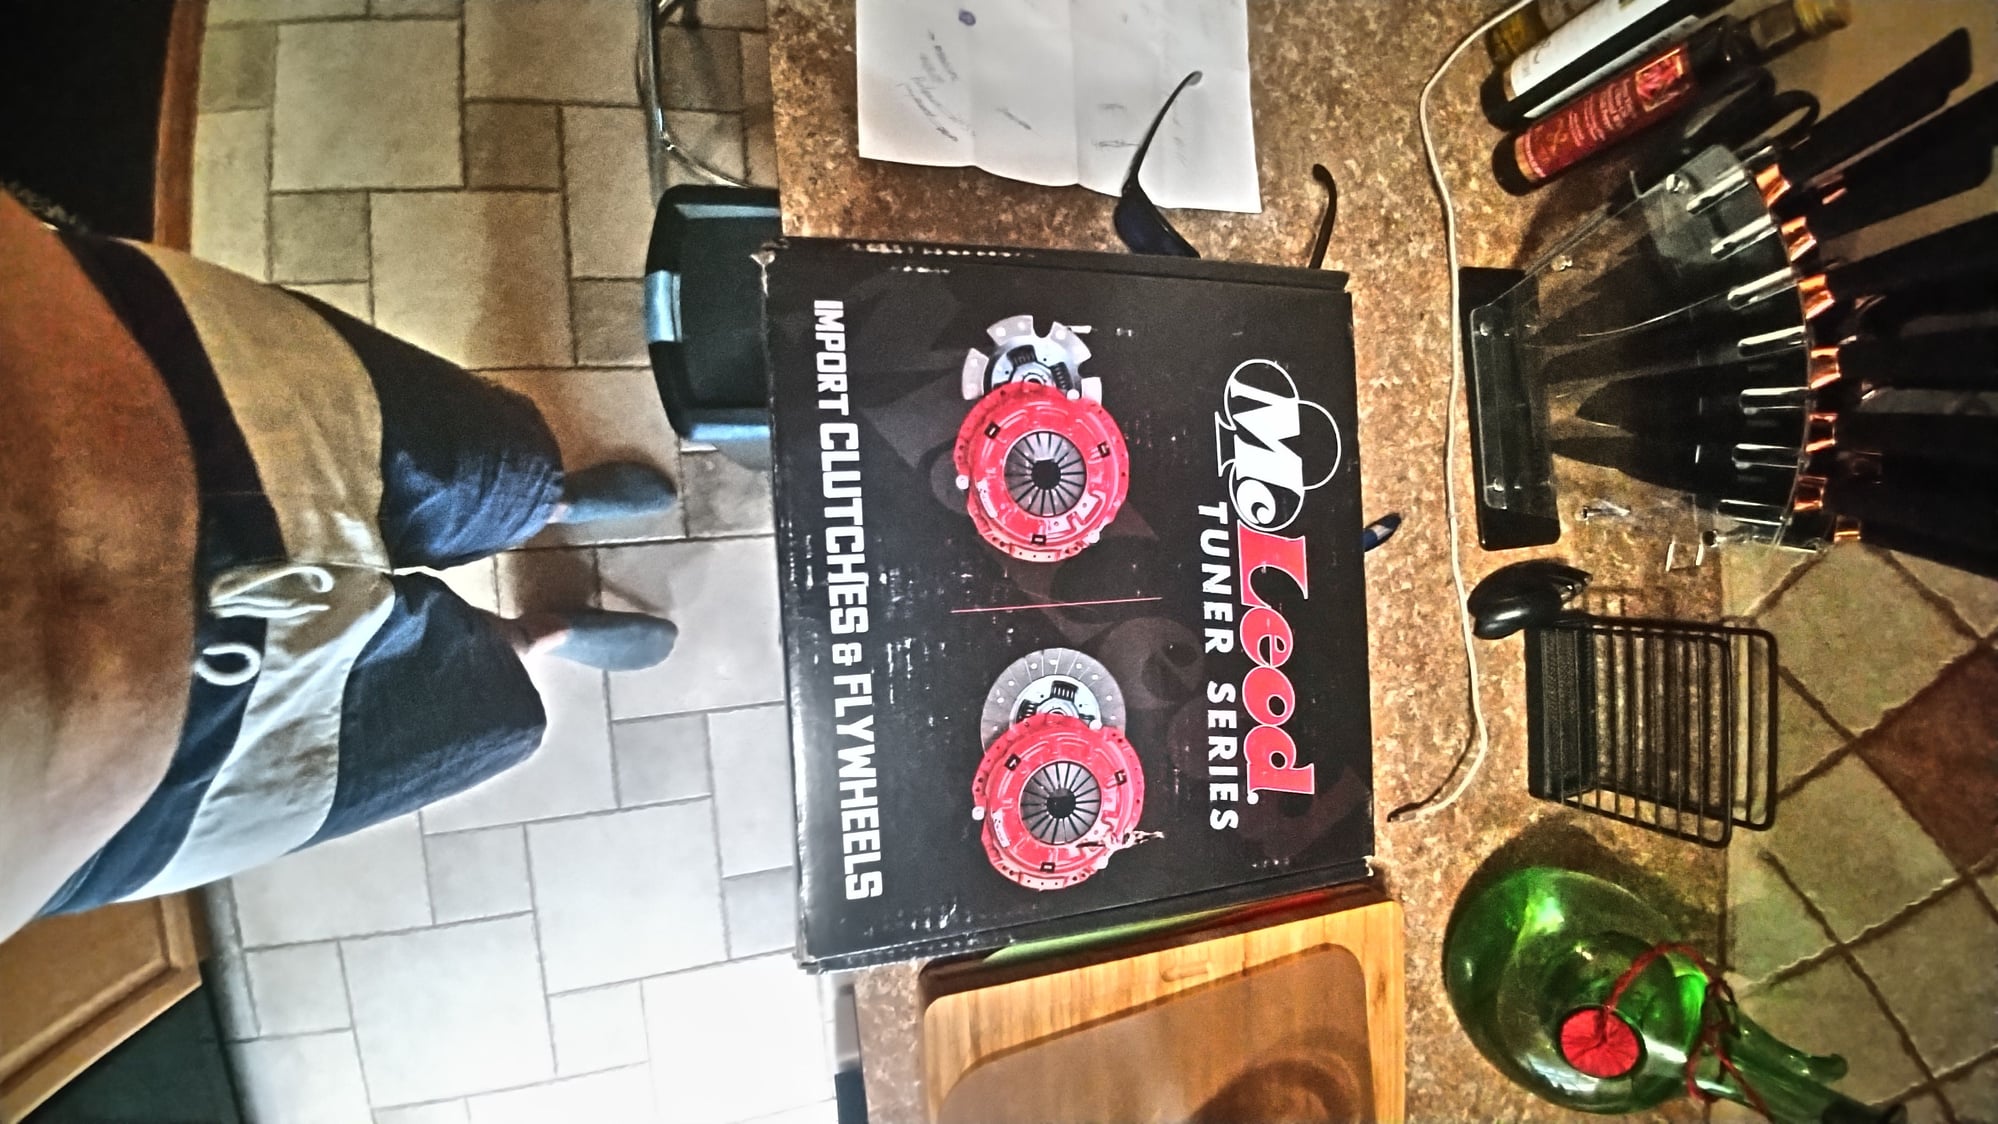 Engine - Power Adders - McLeod clutch kit - New - 1993 to 1995 Mazda RX-7 - Woodhaven, NY 11421, United States